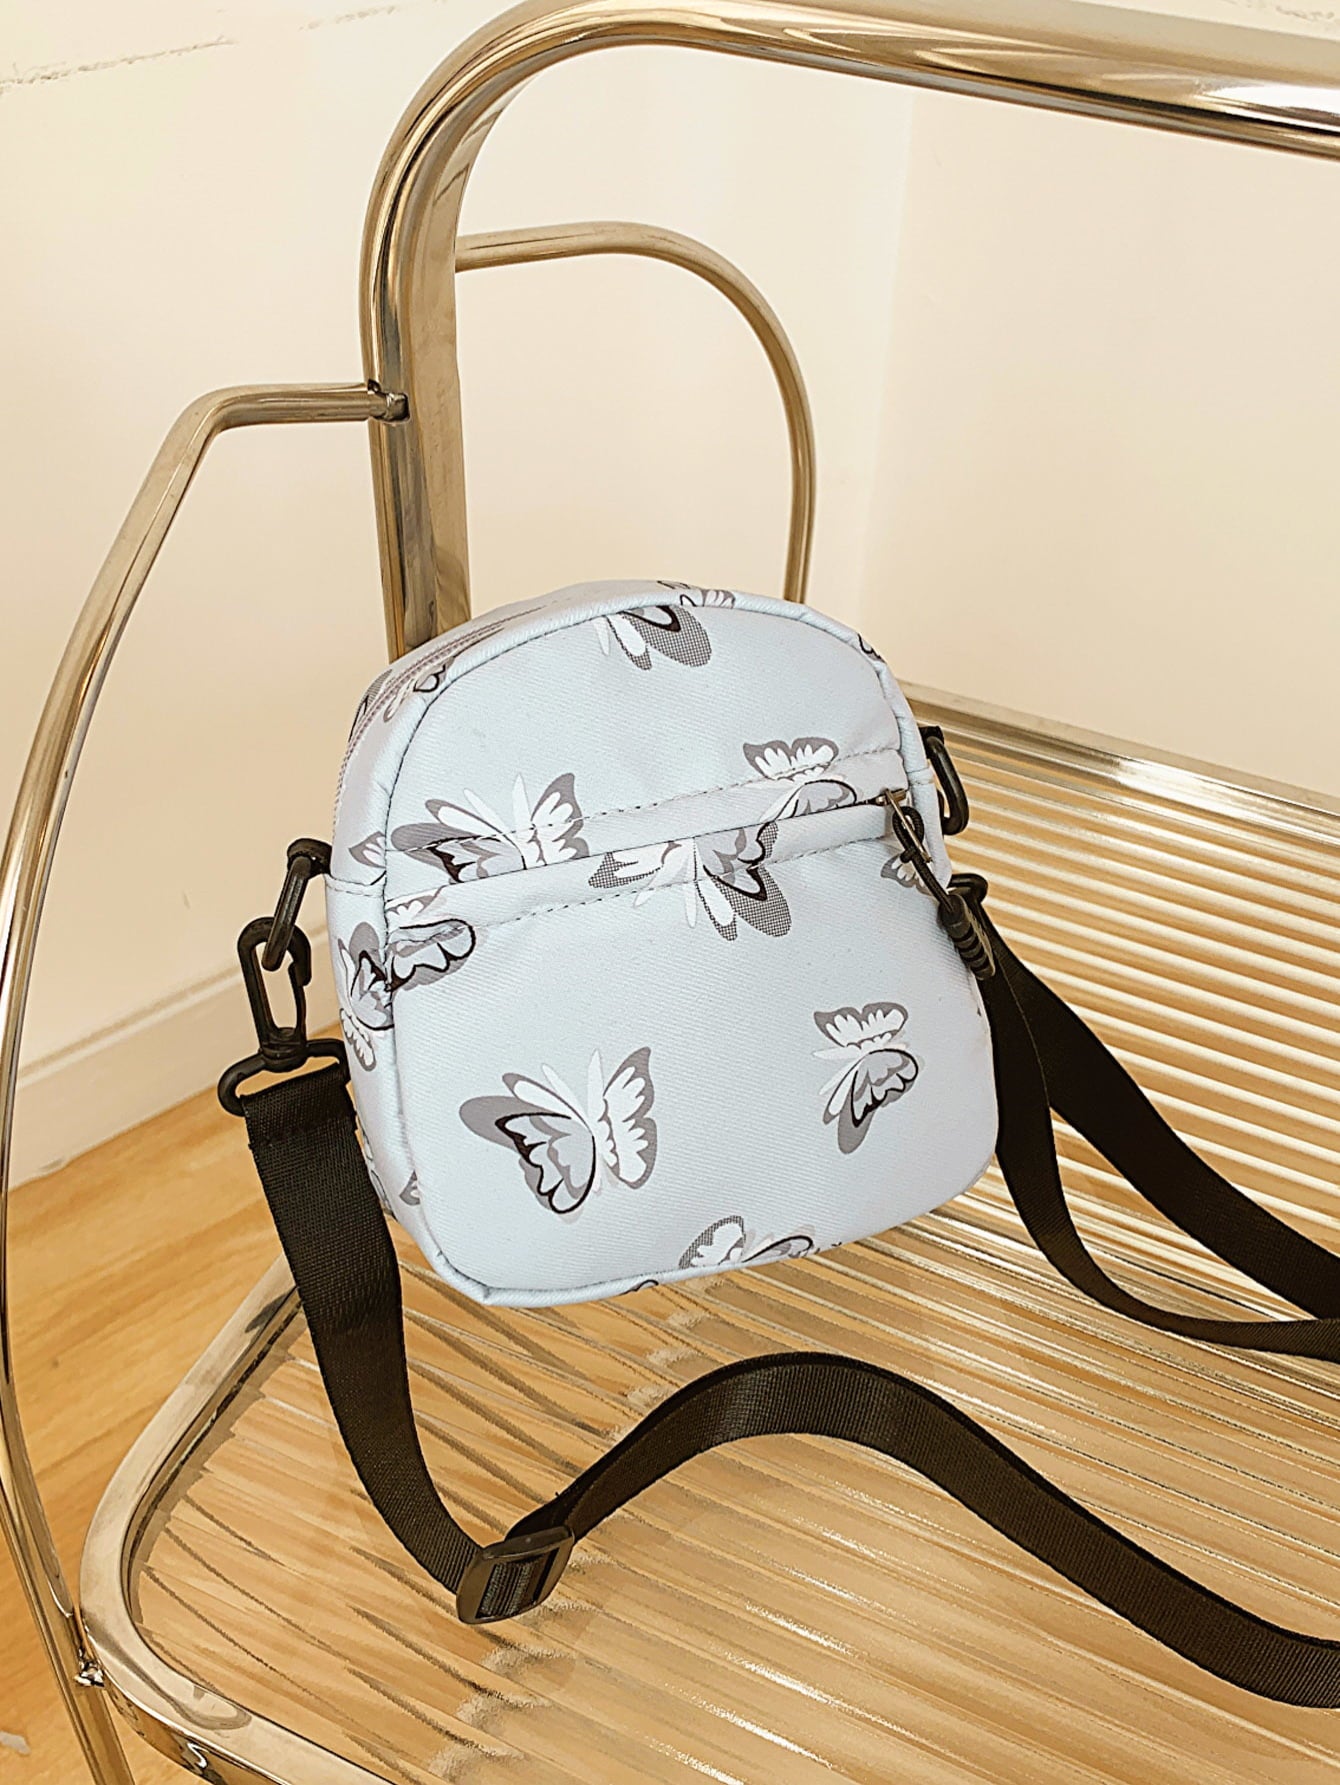 butterfly print polyester shoulder handbag, gray with gray butterflies, on glass and metal slatted cart